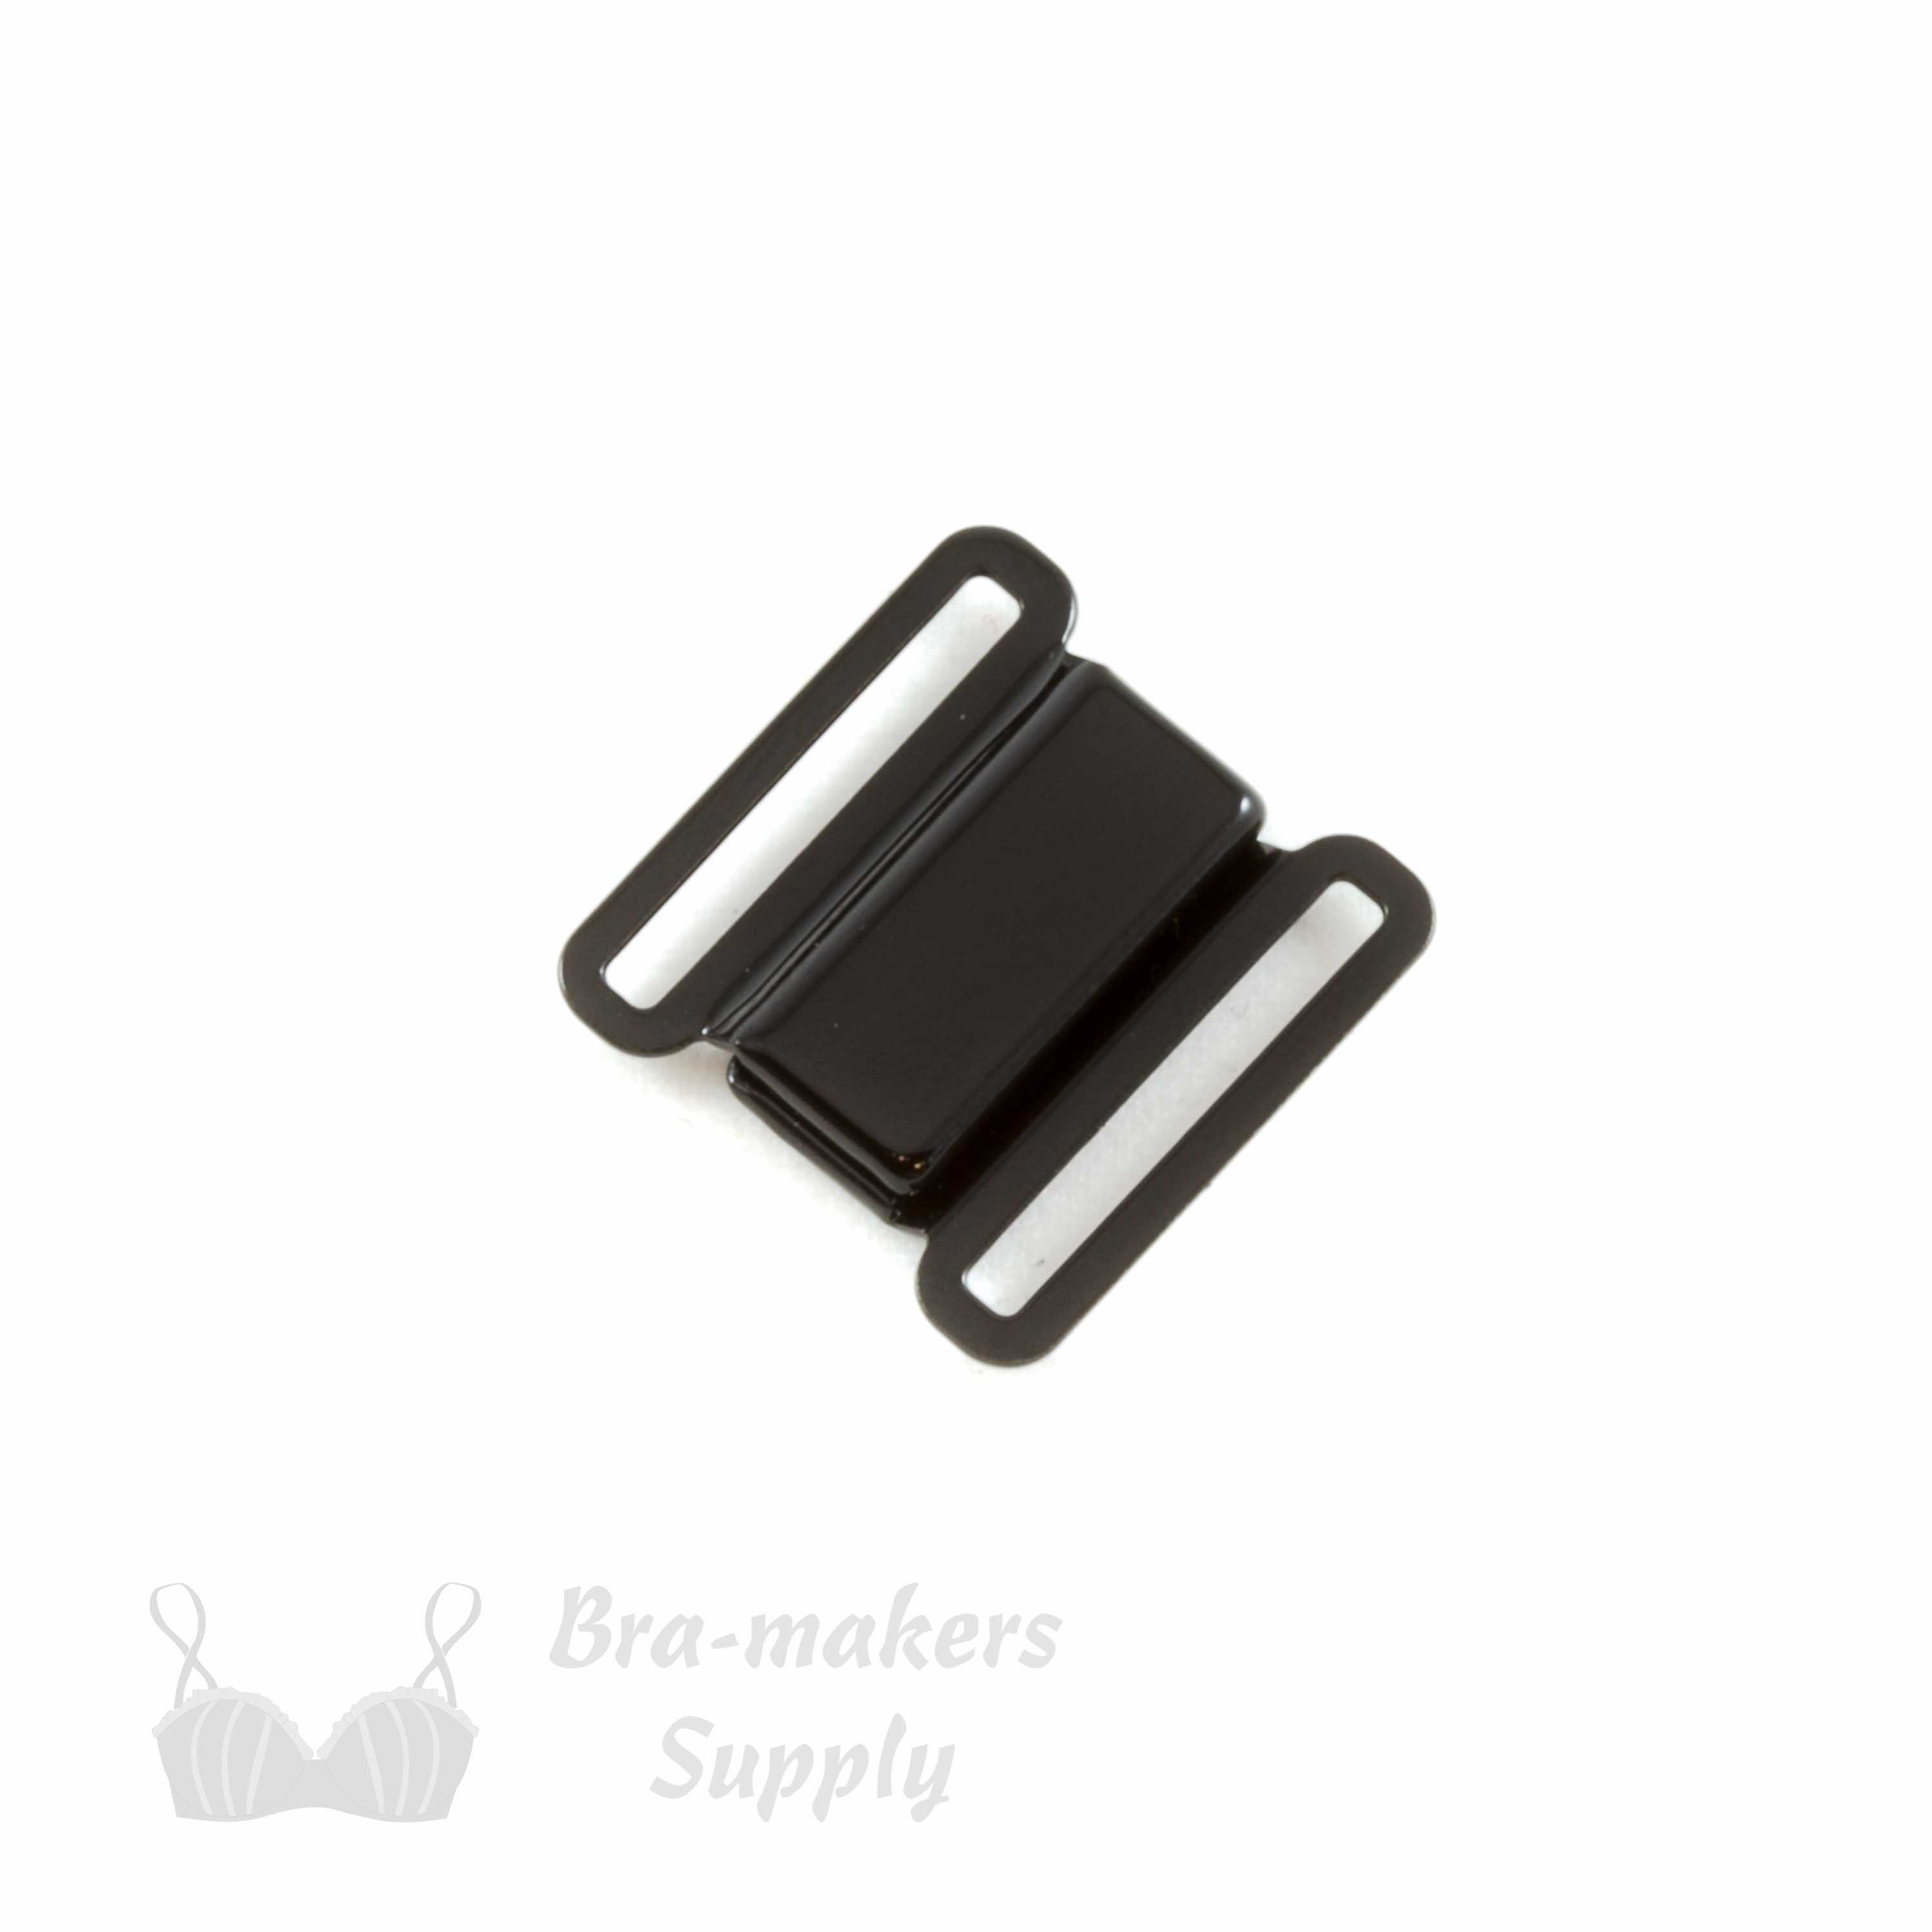 three quarters inch 18 mm metal magnetic bra clip CM-66 black or three quarters inch 18 mm magnetic bra front back fastener CM-66 anthracite Pantone 19-4007 from Bra-Makers Supply clip whole